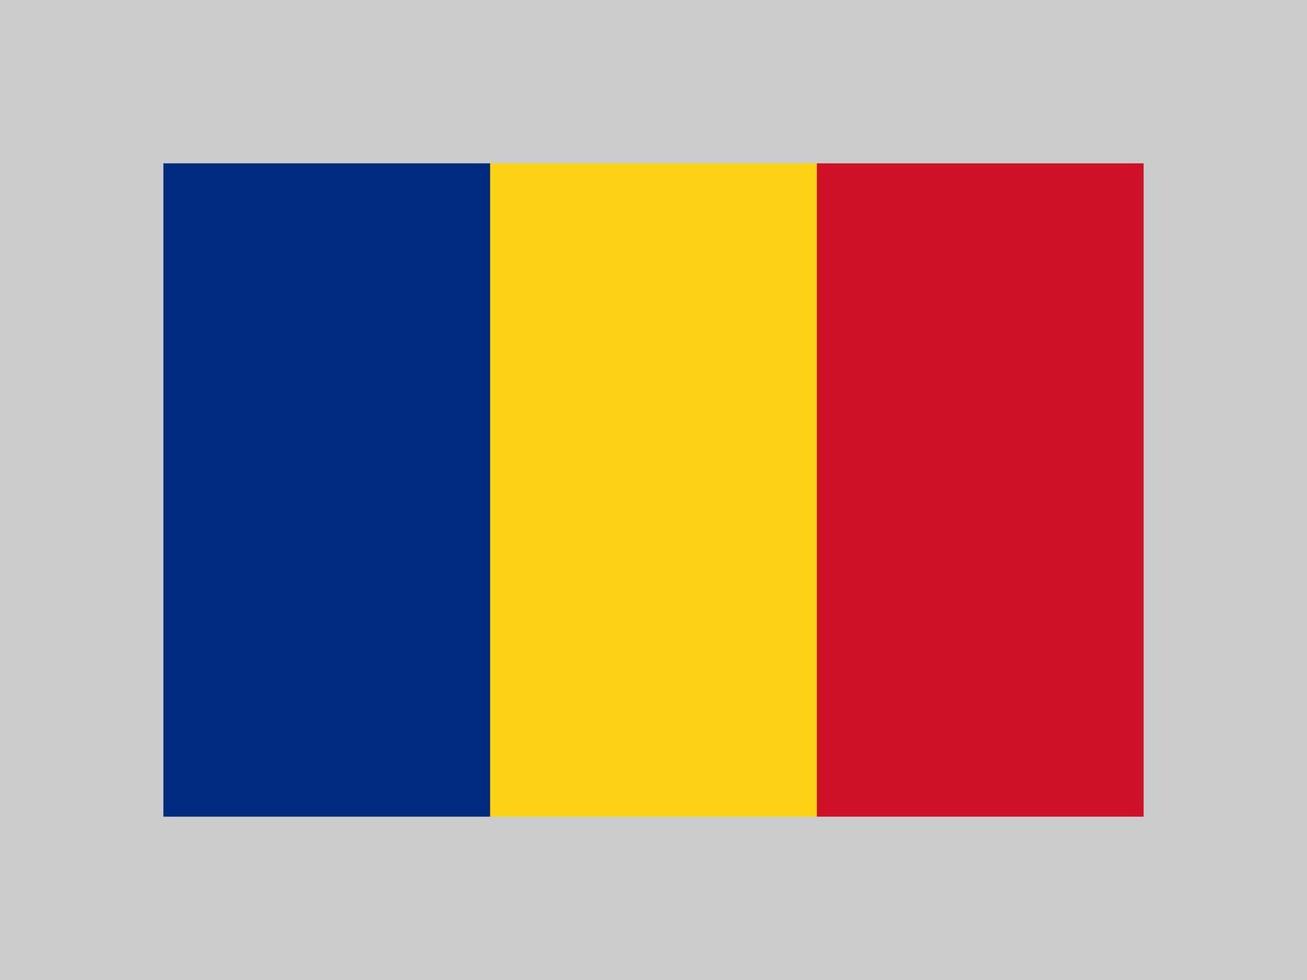 Romania flag, official colors and proportion. Vector illustration.